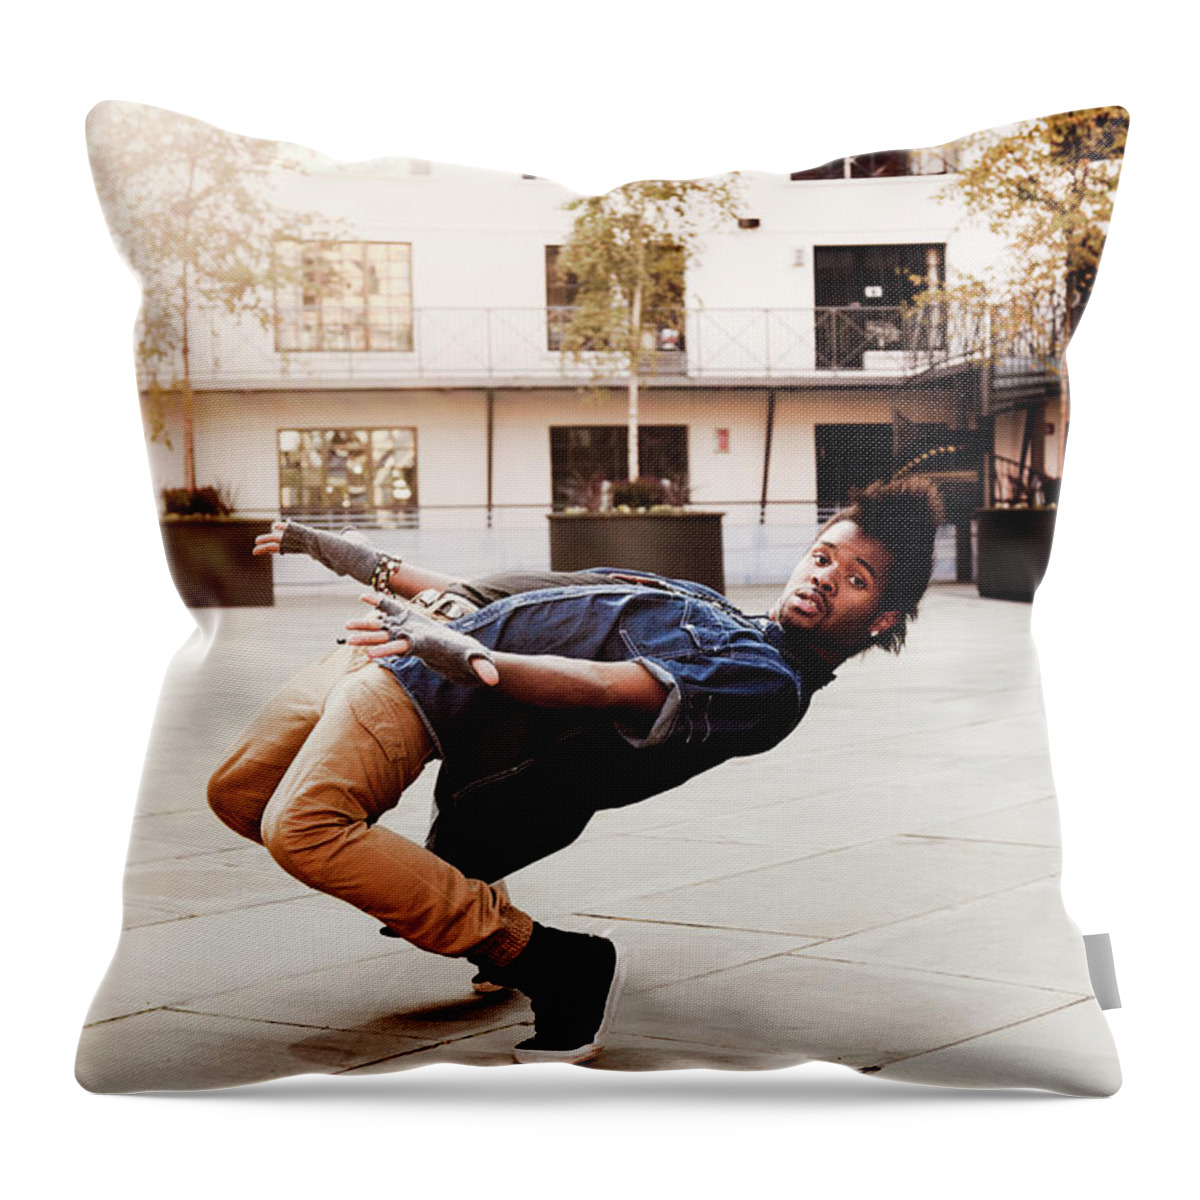 Shadow Throw Pillow featuring the photograph Break Dancer At Courtyard by John And Tina Reid